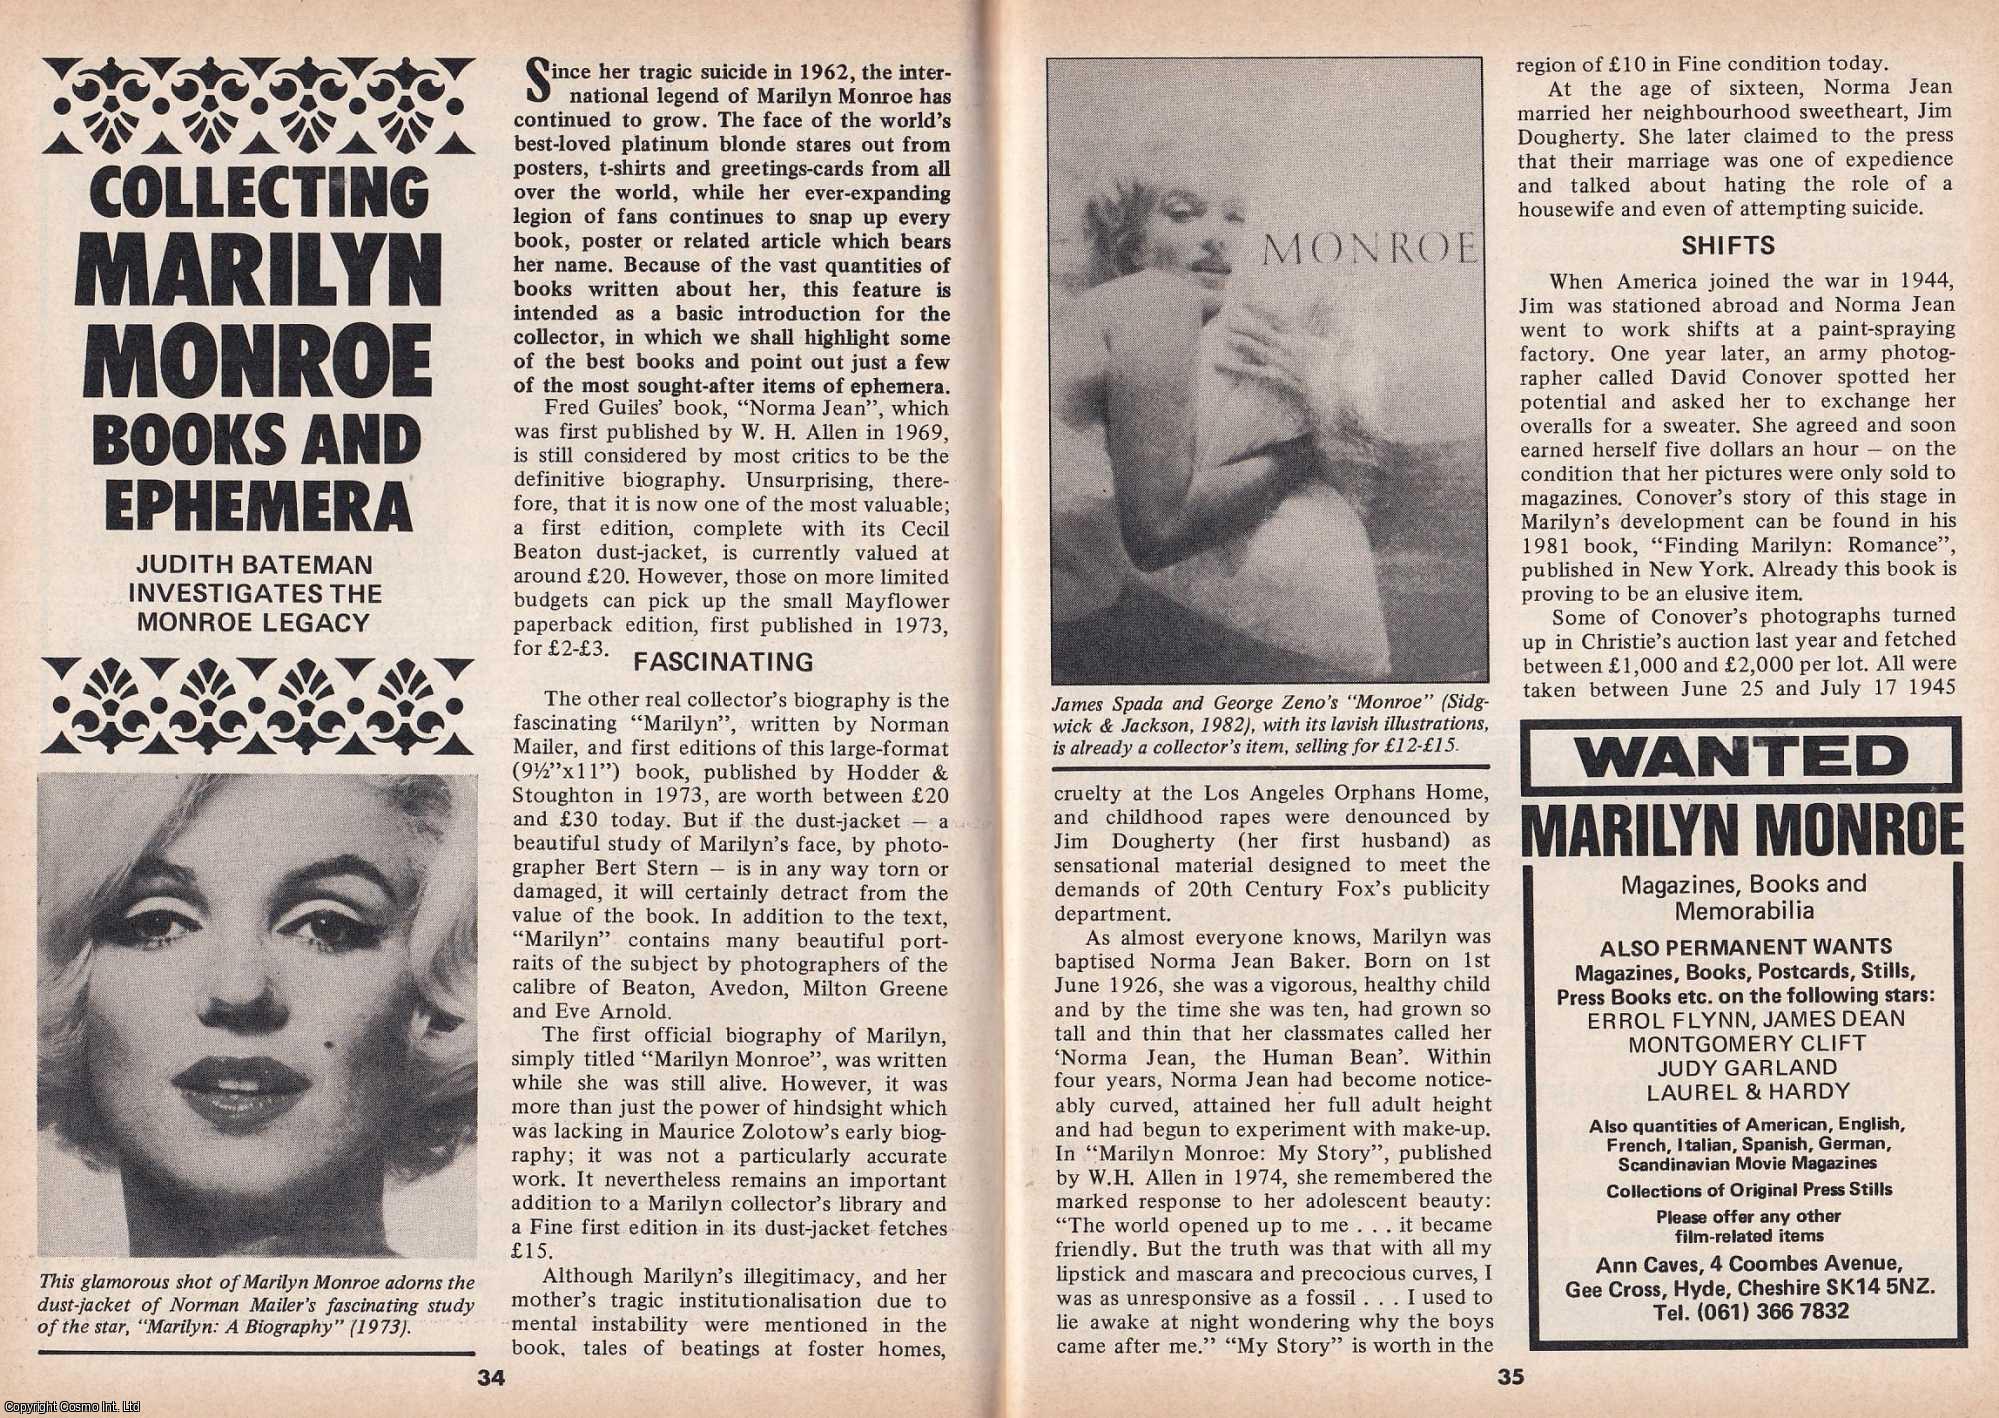 Judith Bateman - Collecting Marilyn Monroe Books & Ephemera. This is an original article separated from an issue of The Book & Magazine Collector publication.